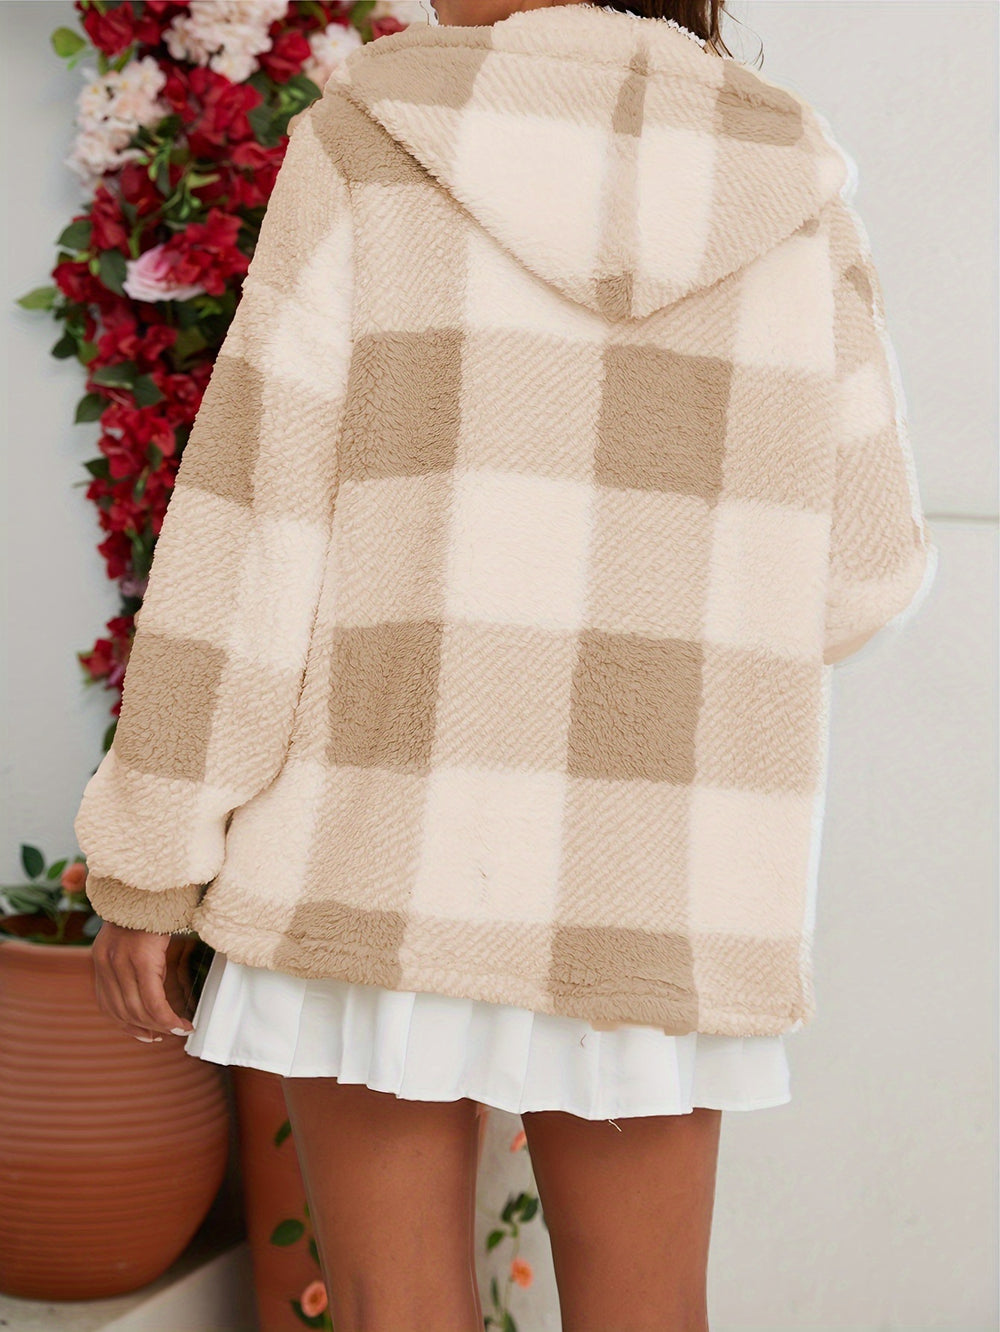 Plaid Print Teddy Hooded Coat, Casual Zip Up Long Sleeve Warm Outerwear, Women's - Shaners Merchandise